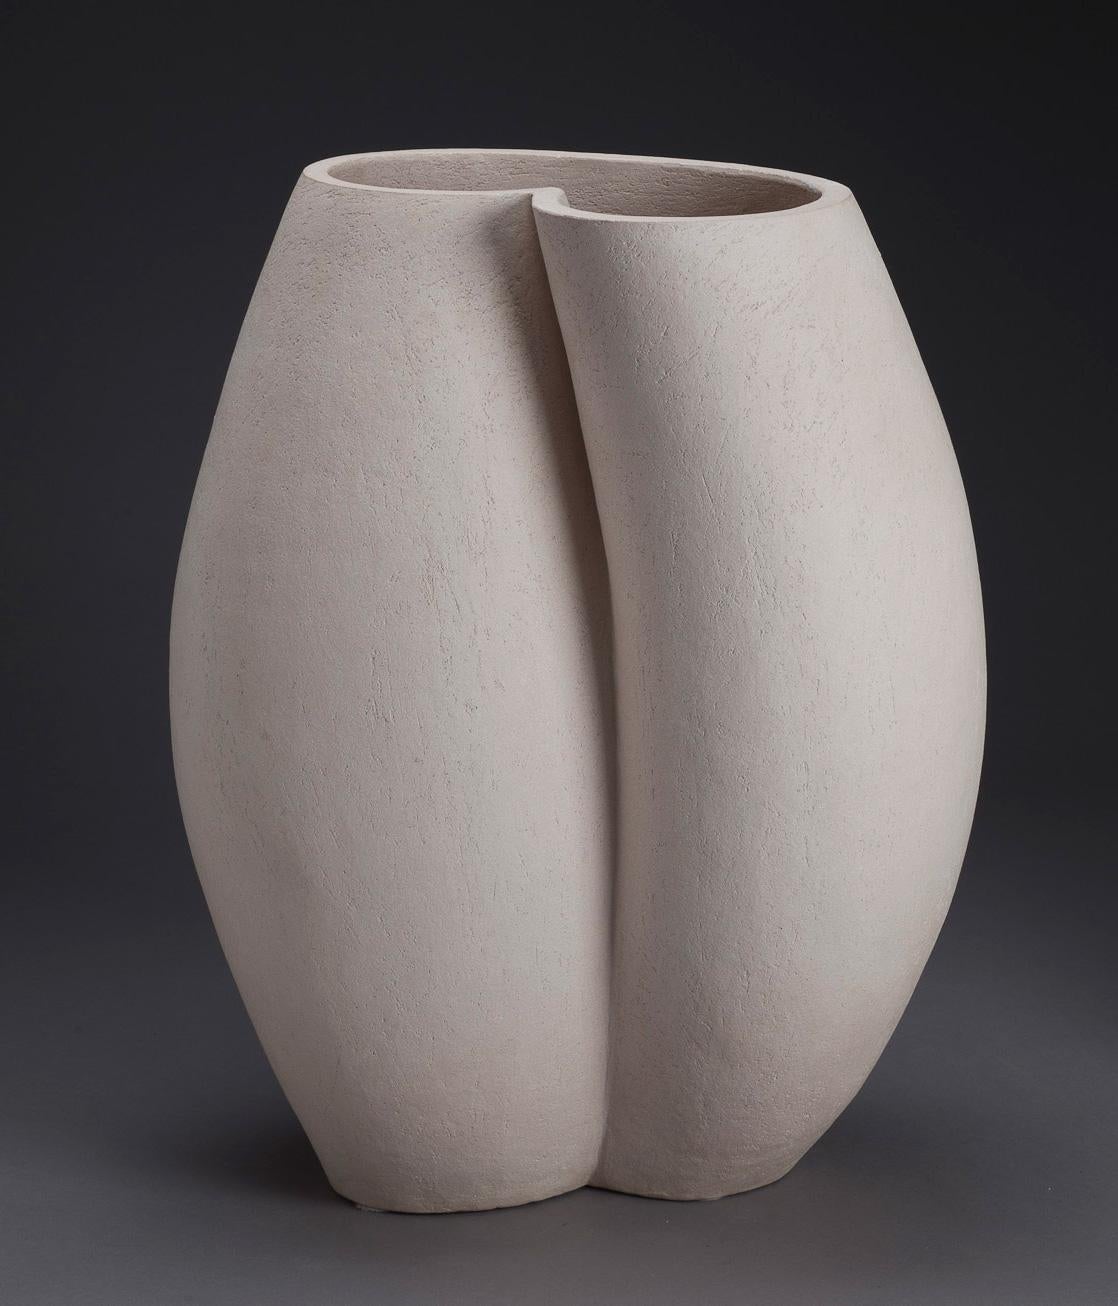 Steve Cartwright, Hip Vessel

Handmade Sculptural Ceramic, Stoneware Clay, fired to 1250c

41 x 28 cm (16.1 x 11.2 in)

Edition of 5 per year